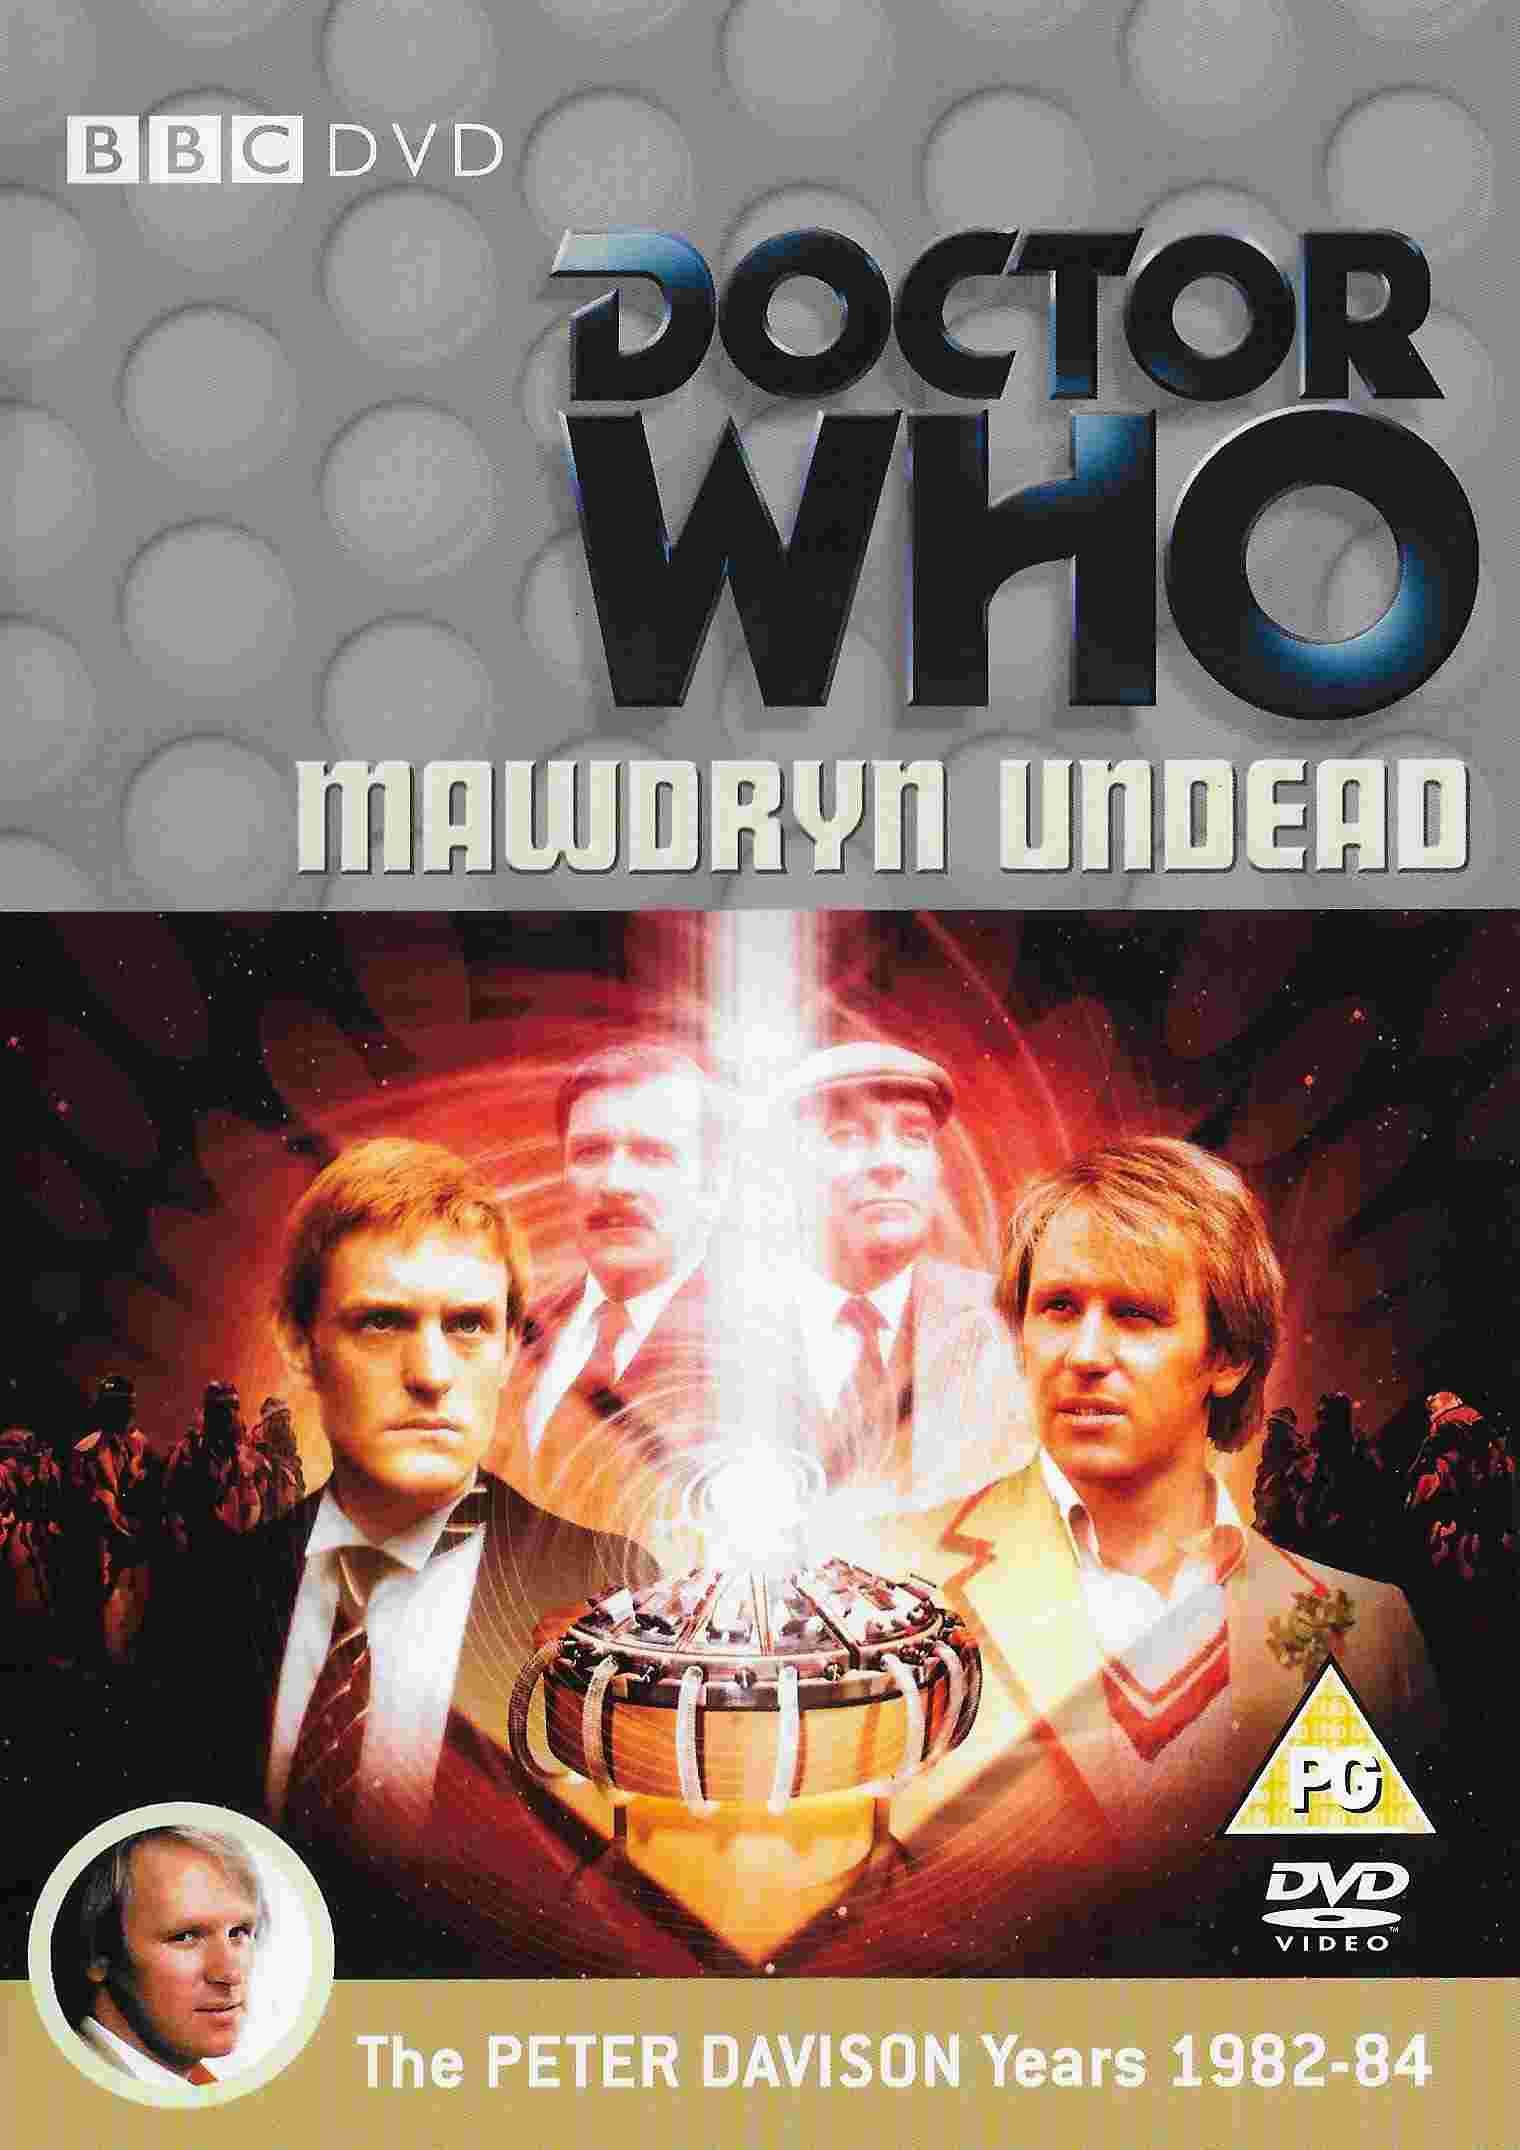 Picture of BBCDVD 2596A Doctor Who - Mawdryn Undead by artist Peter Grimwade from the BBC records and Tapes library